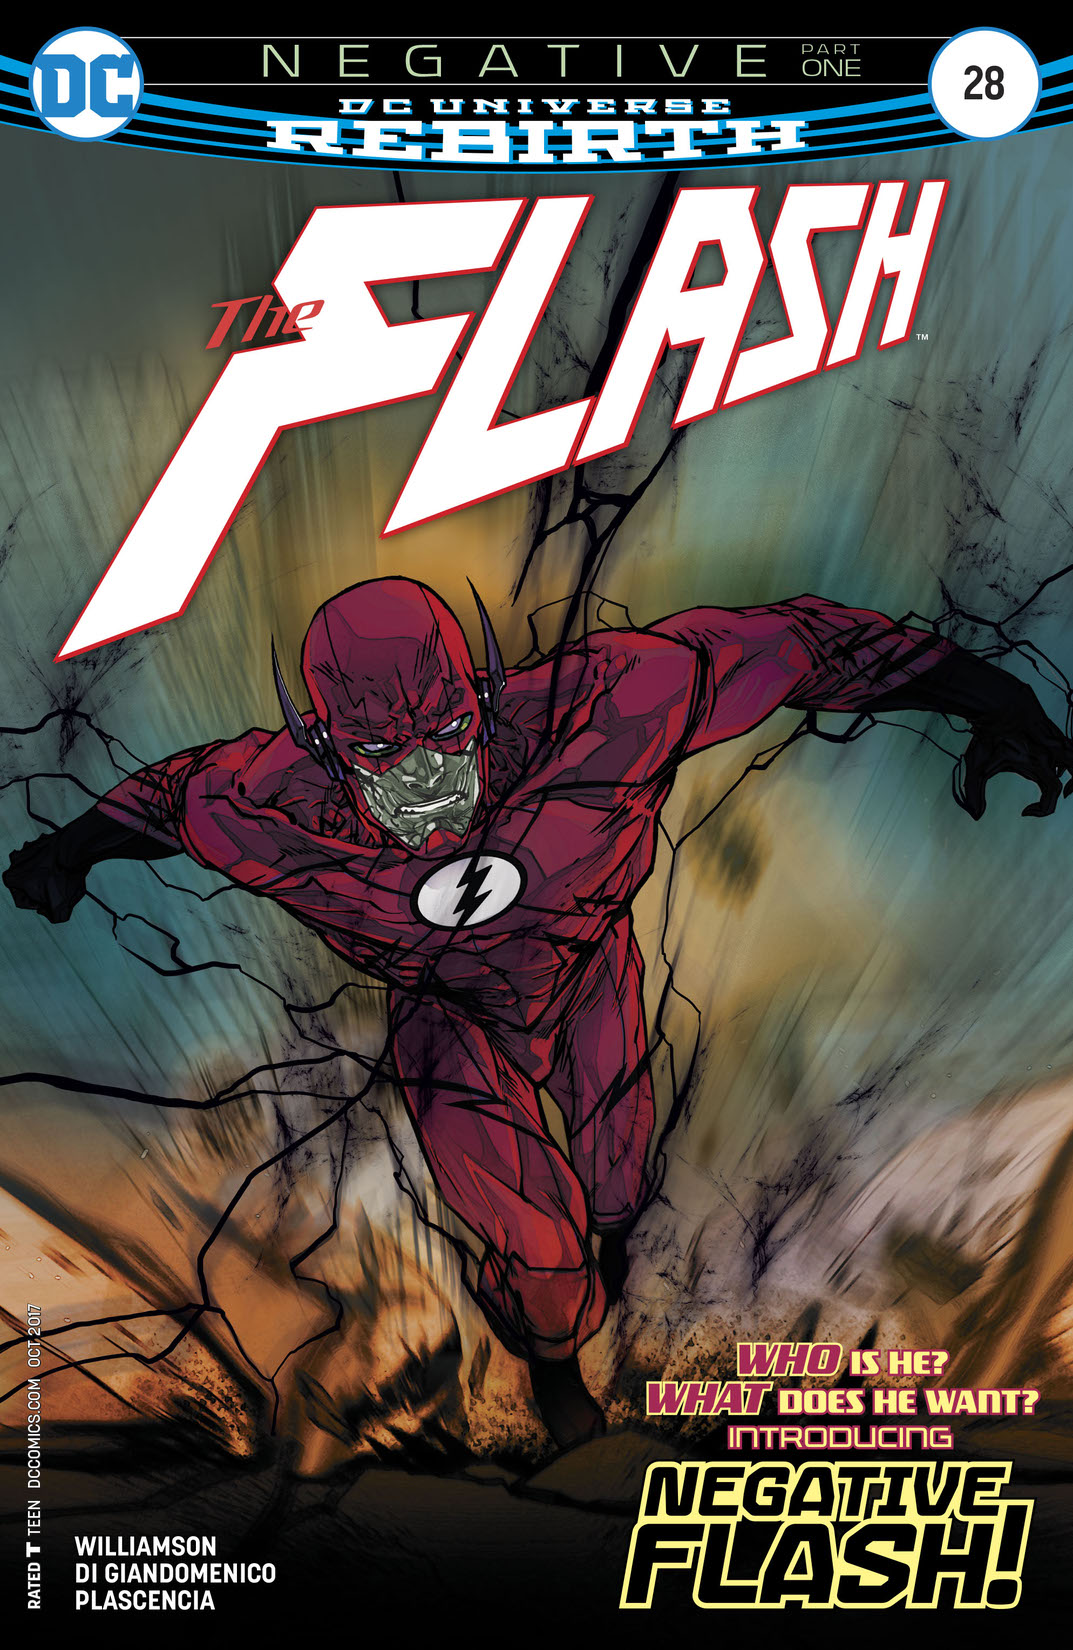 The Flash (2016-) #28 preview images